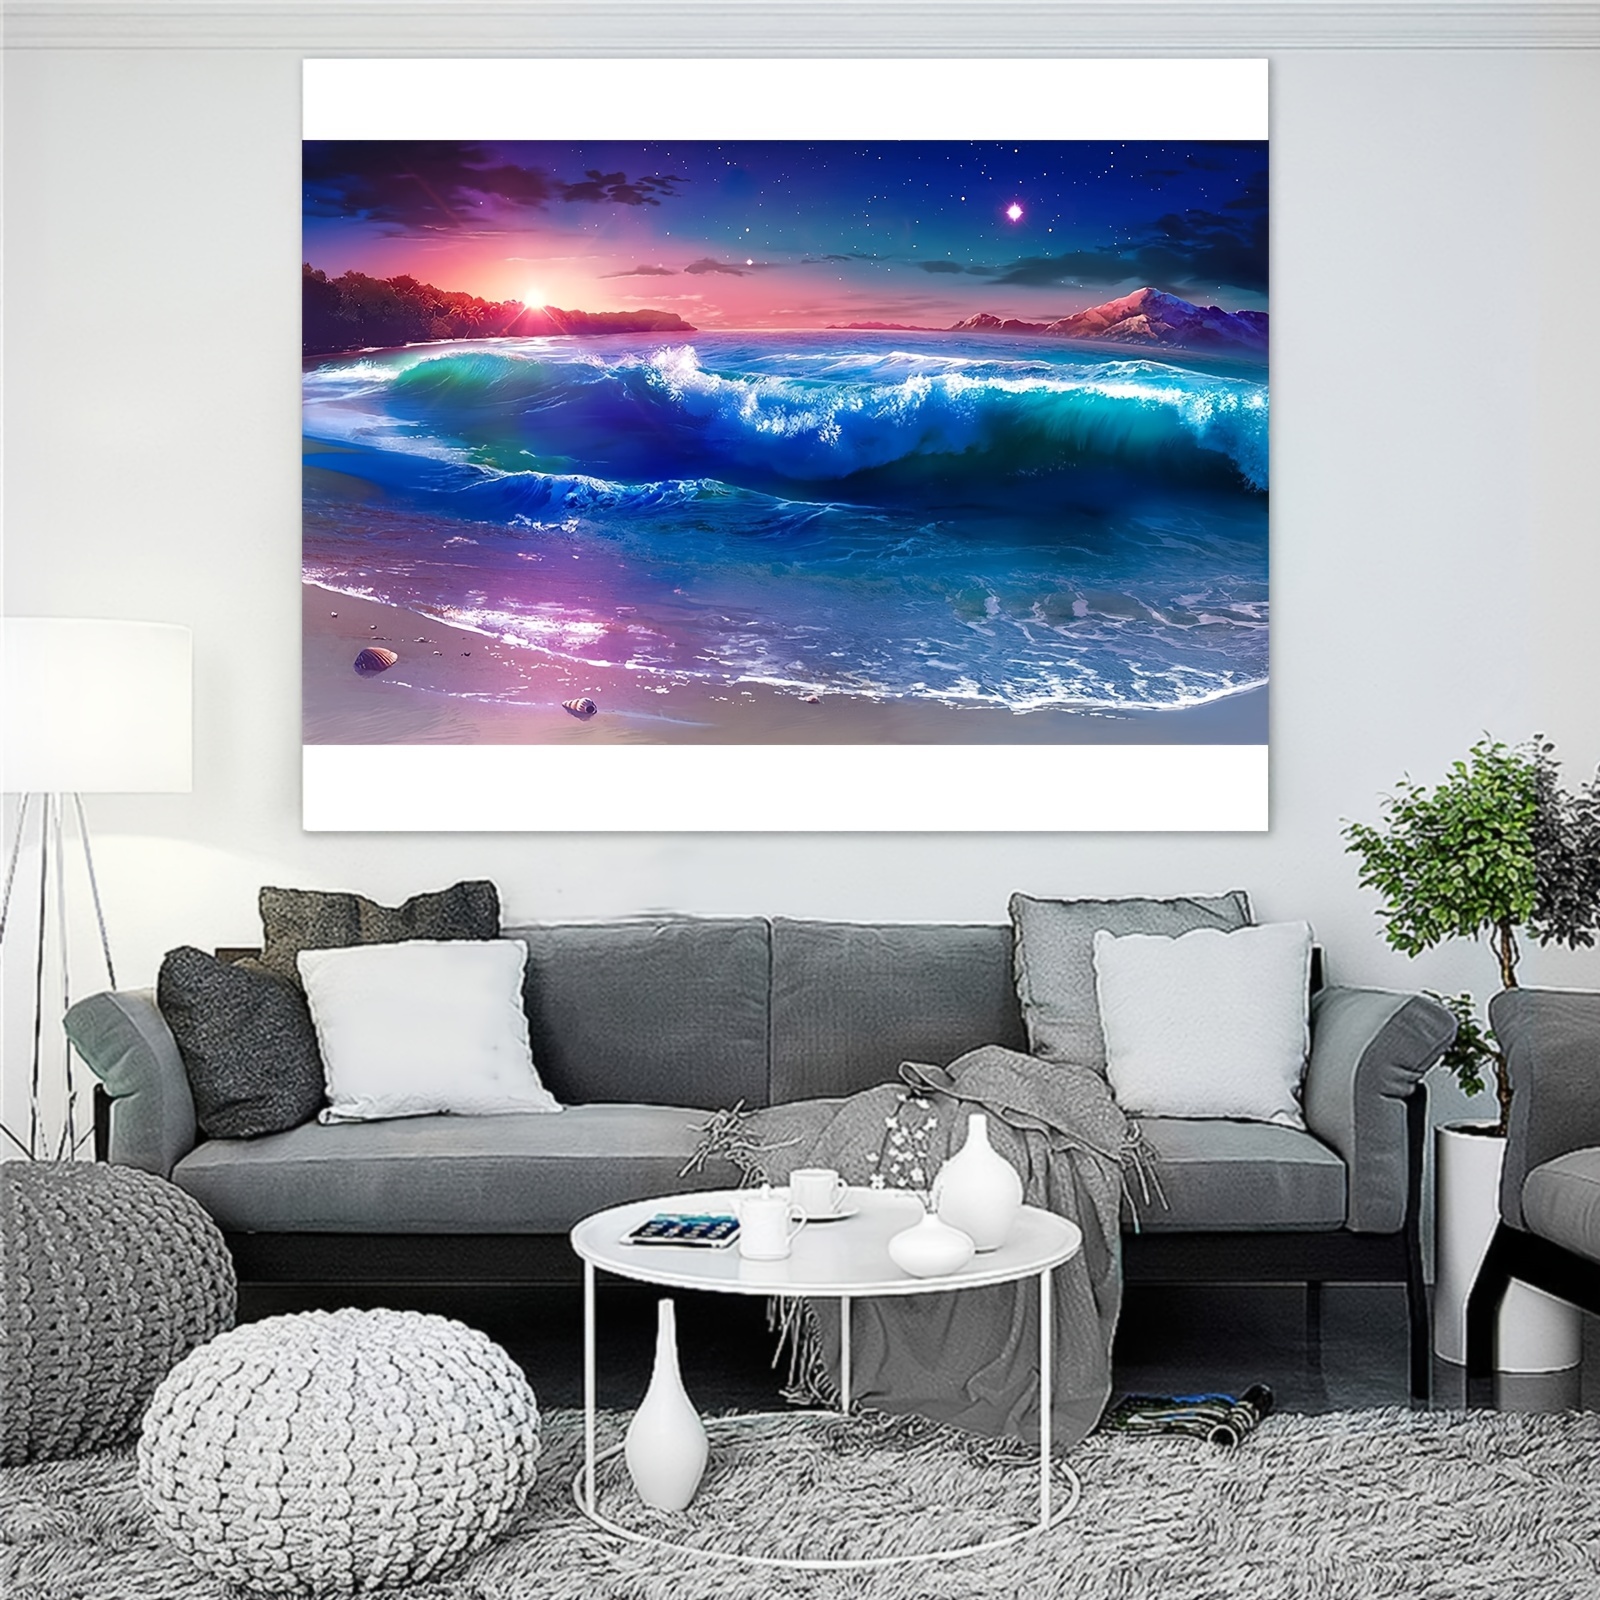 Mchoice 5d diamond painting Rhinestone Pasted DIY Diamond Painting Cross  Stitch home decor room decor diamond art for Relaxation and Home Wall Decor  